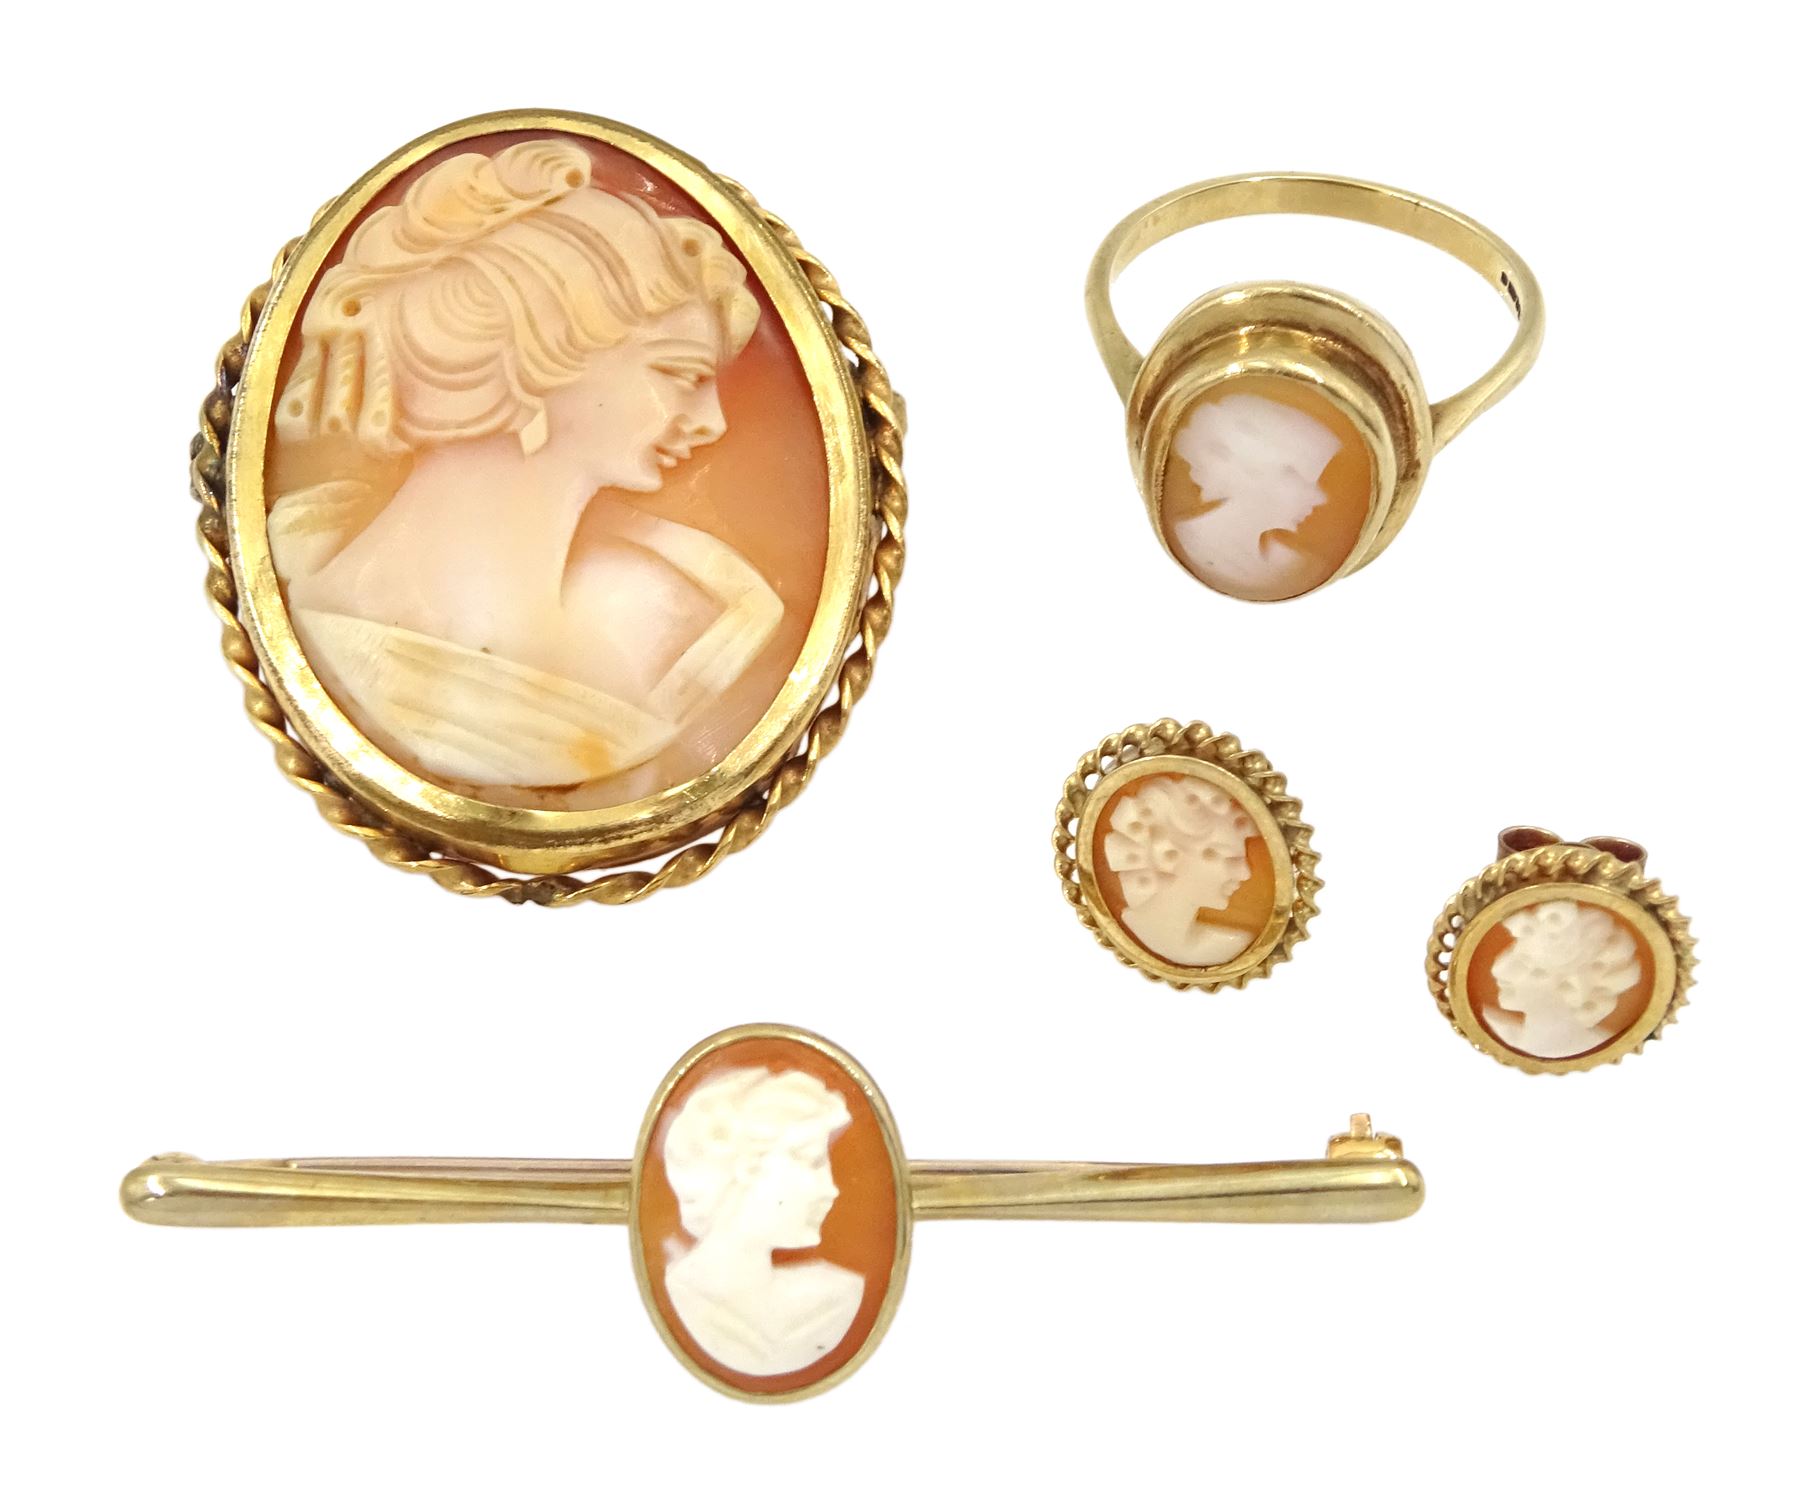 9ct gold cameo jewellery including two brooches